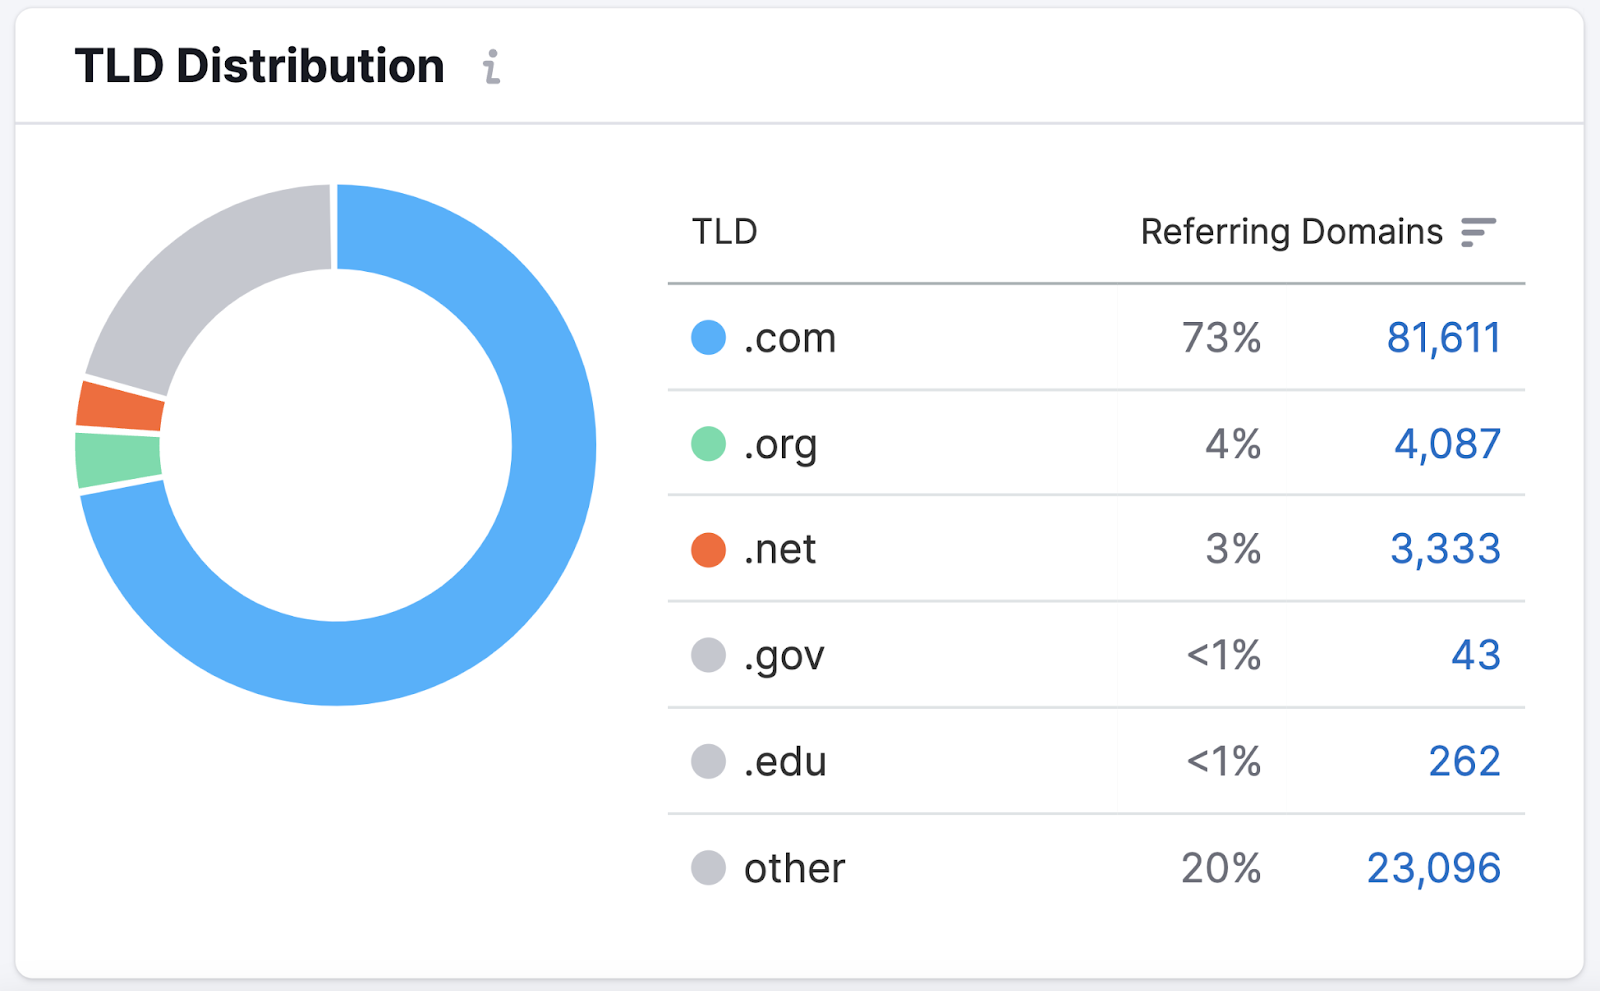 "TLD Distribution" section of Backlink Analytics report